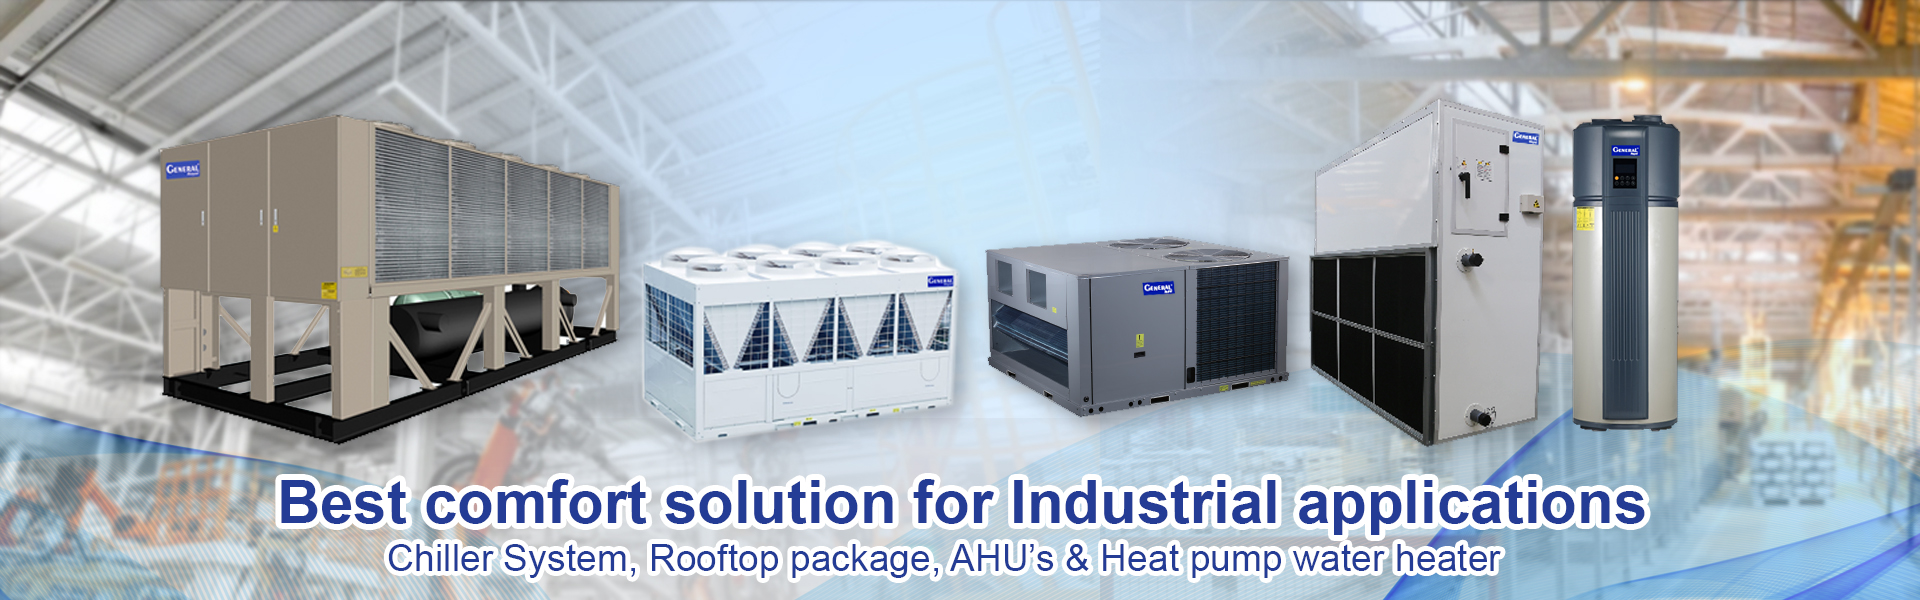 Best comfort solution for Industrial applications